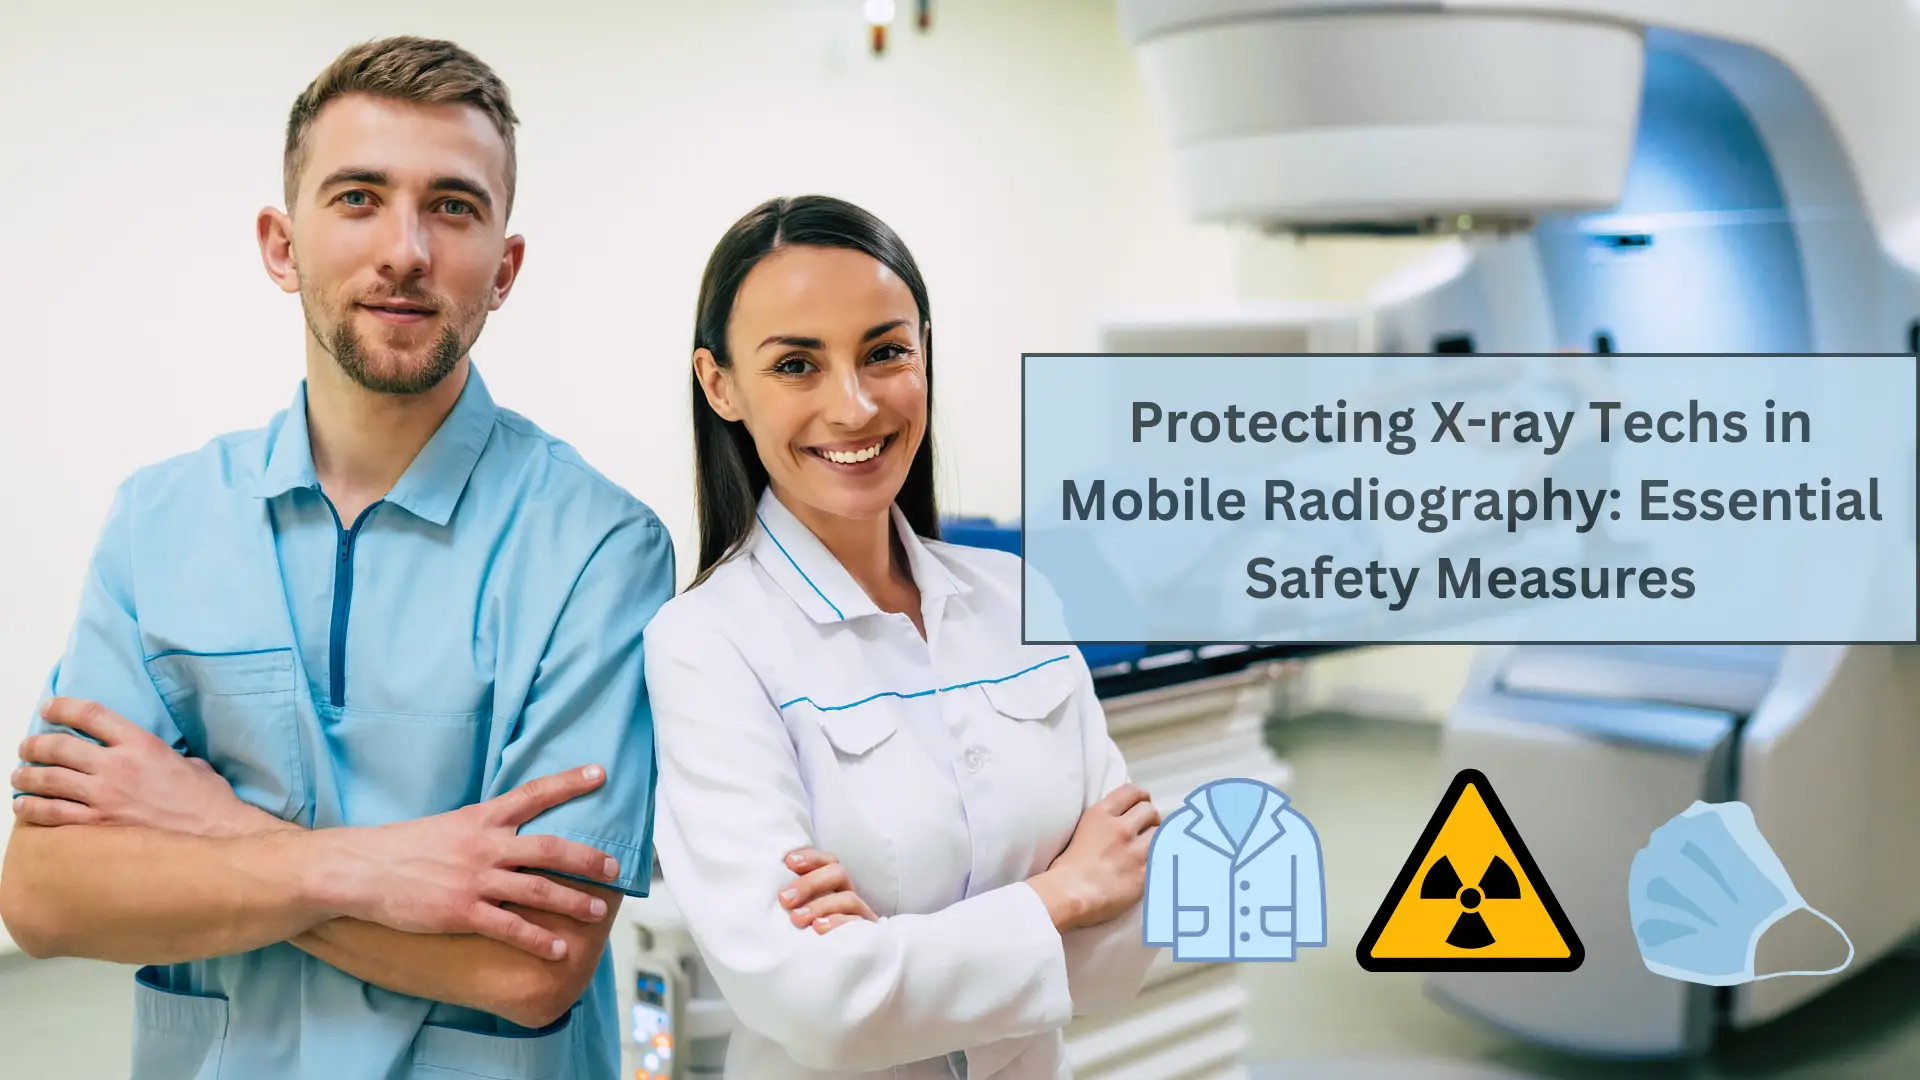 Protecting X-ray Techs in Mobile Radiography: Essential Safety Measures